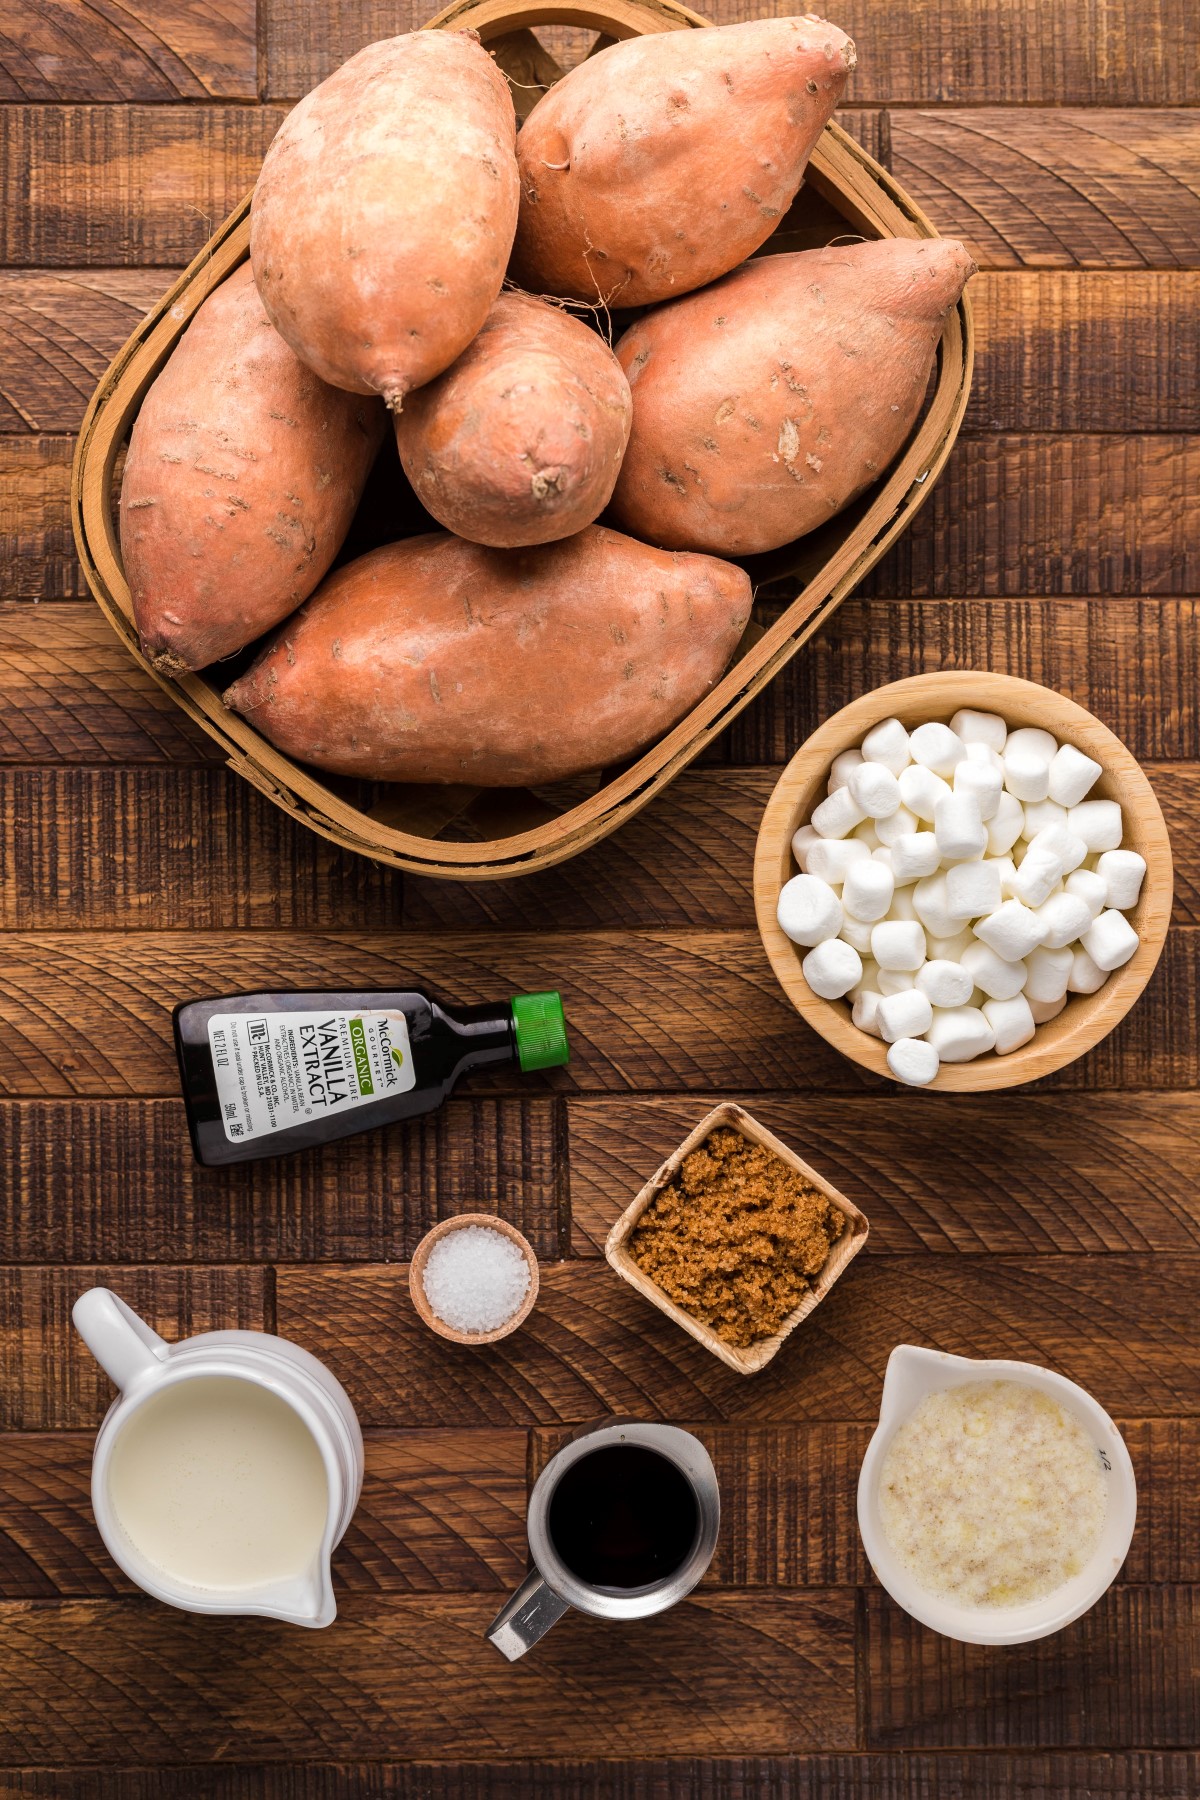 All the ingredients to make smoked sweet potatoes laid out on a wooden countertop.